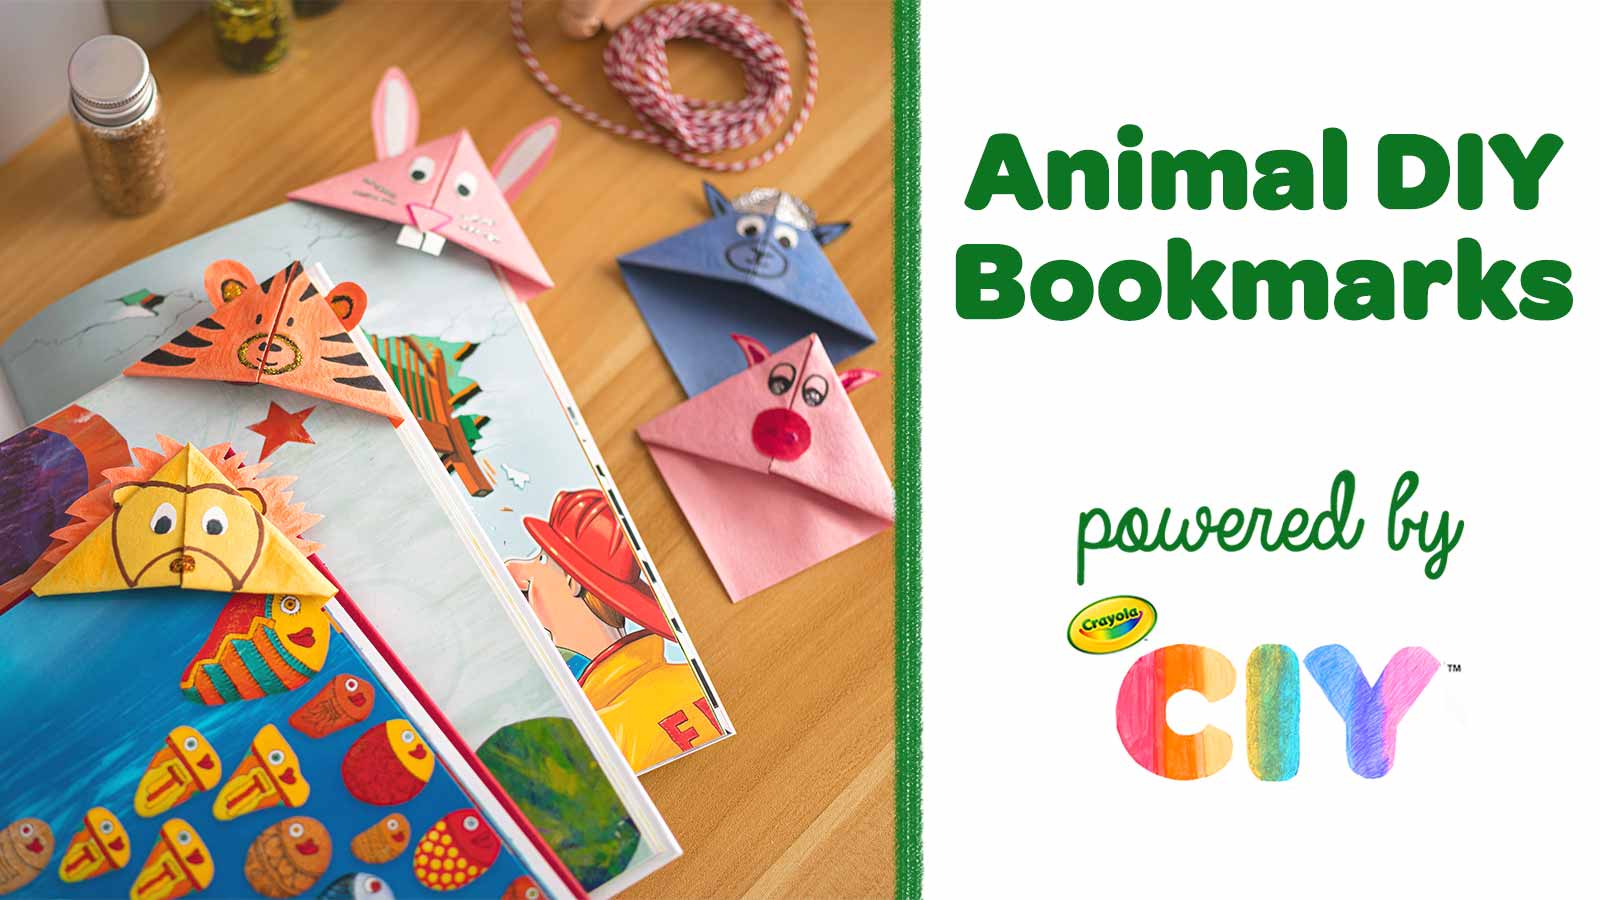 Animal DIY Bookmark for Kids | Crafts  | Crayola CIY, DIY  Crafts for Kids and Adults 